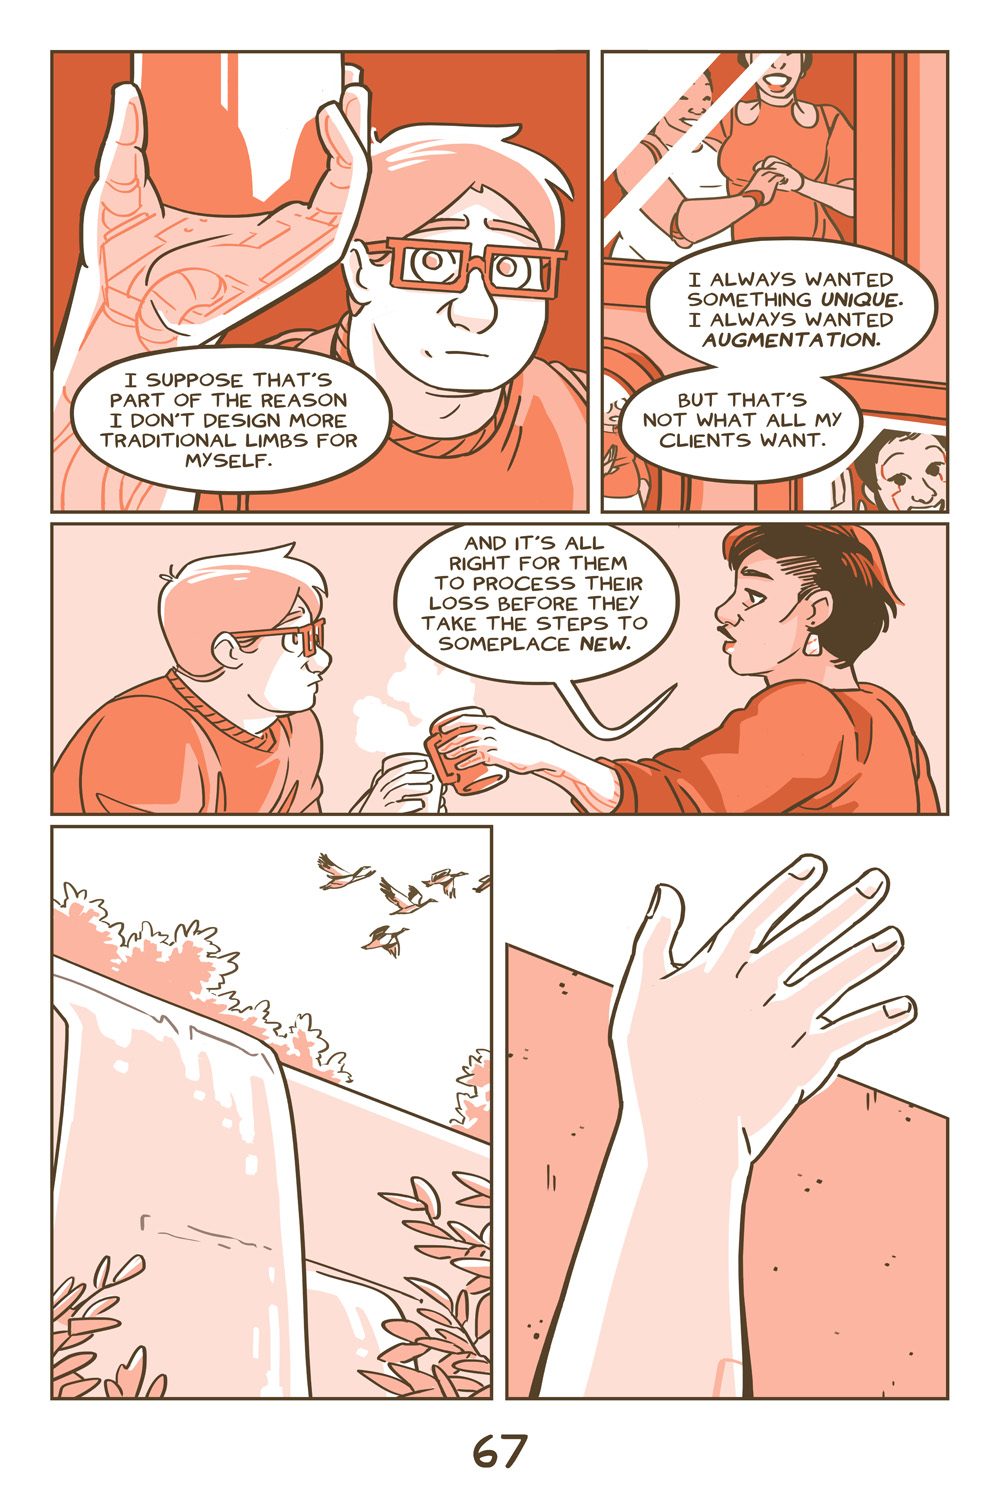 Chapter 6, Page 67